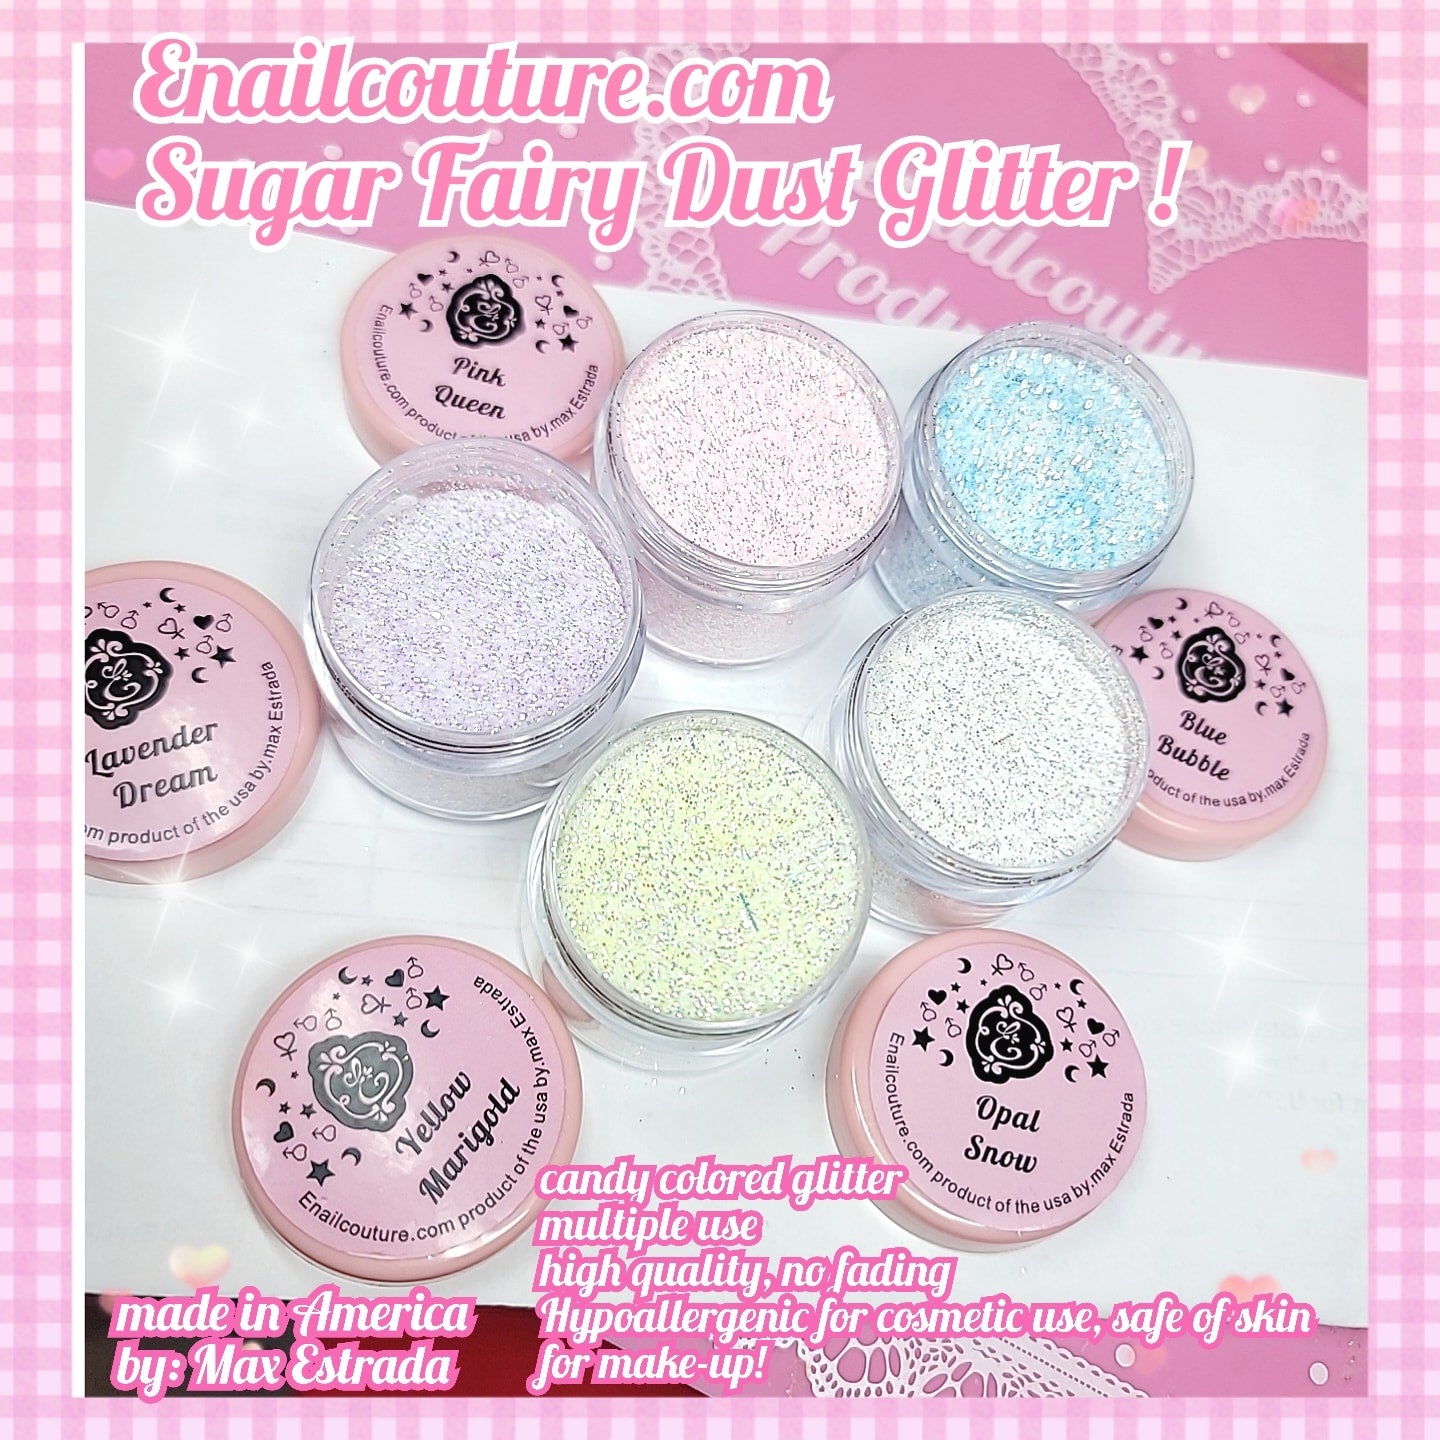 Edible Flakes - Rose Mist by Crystal Candy 